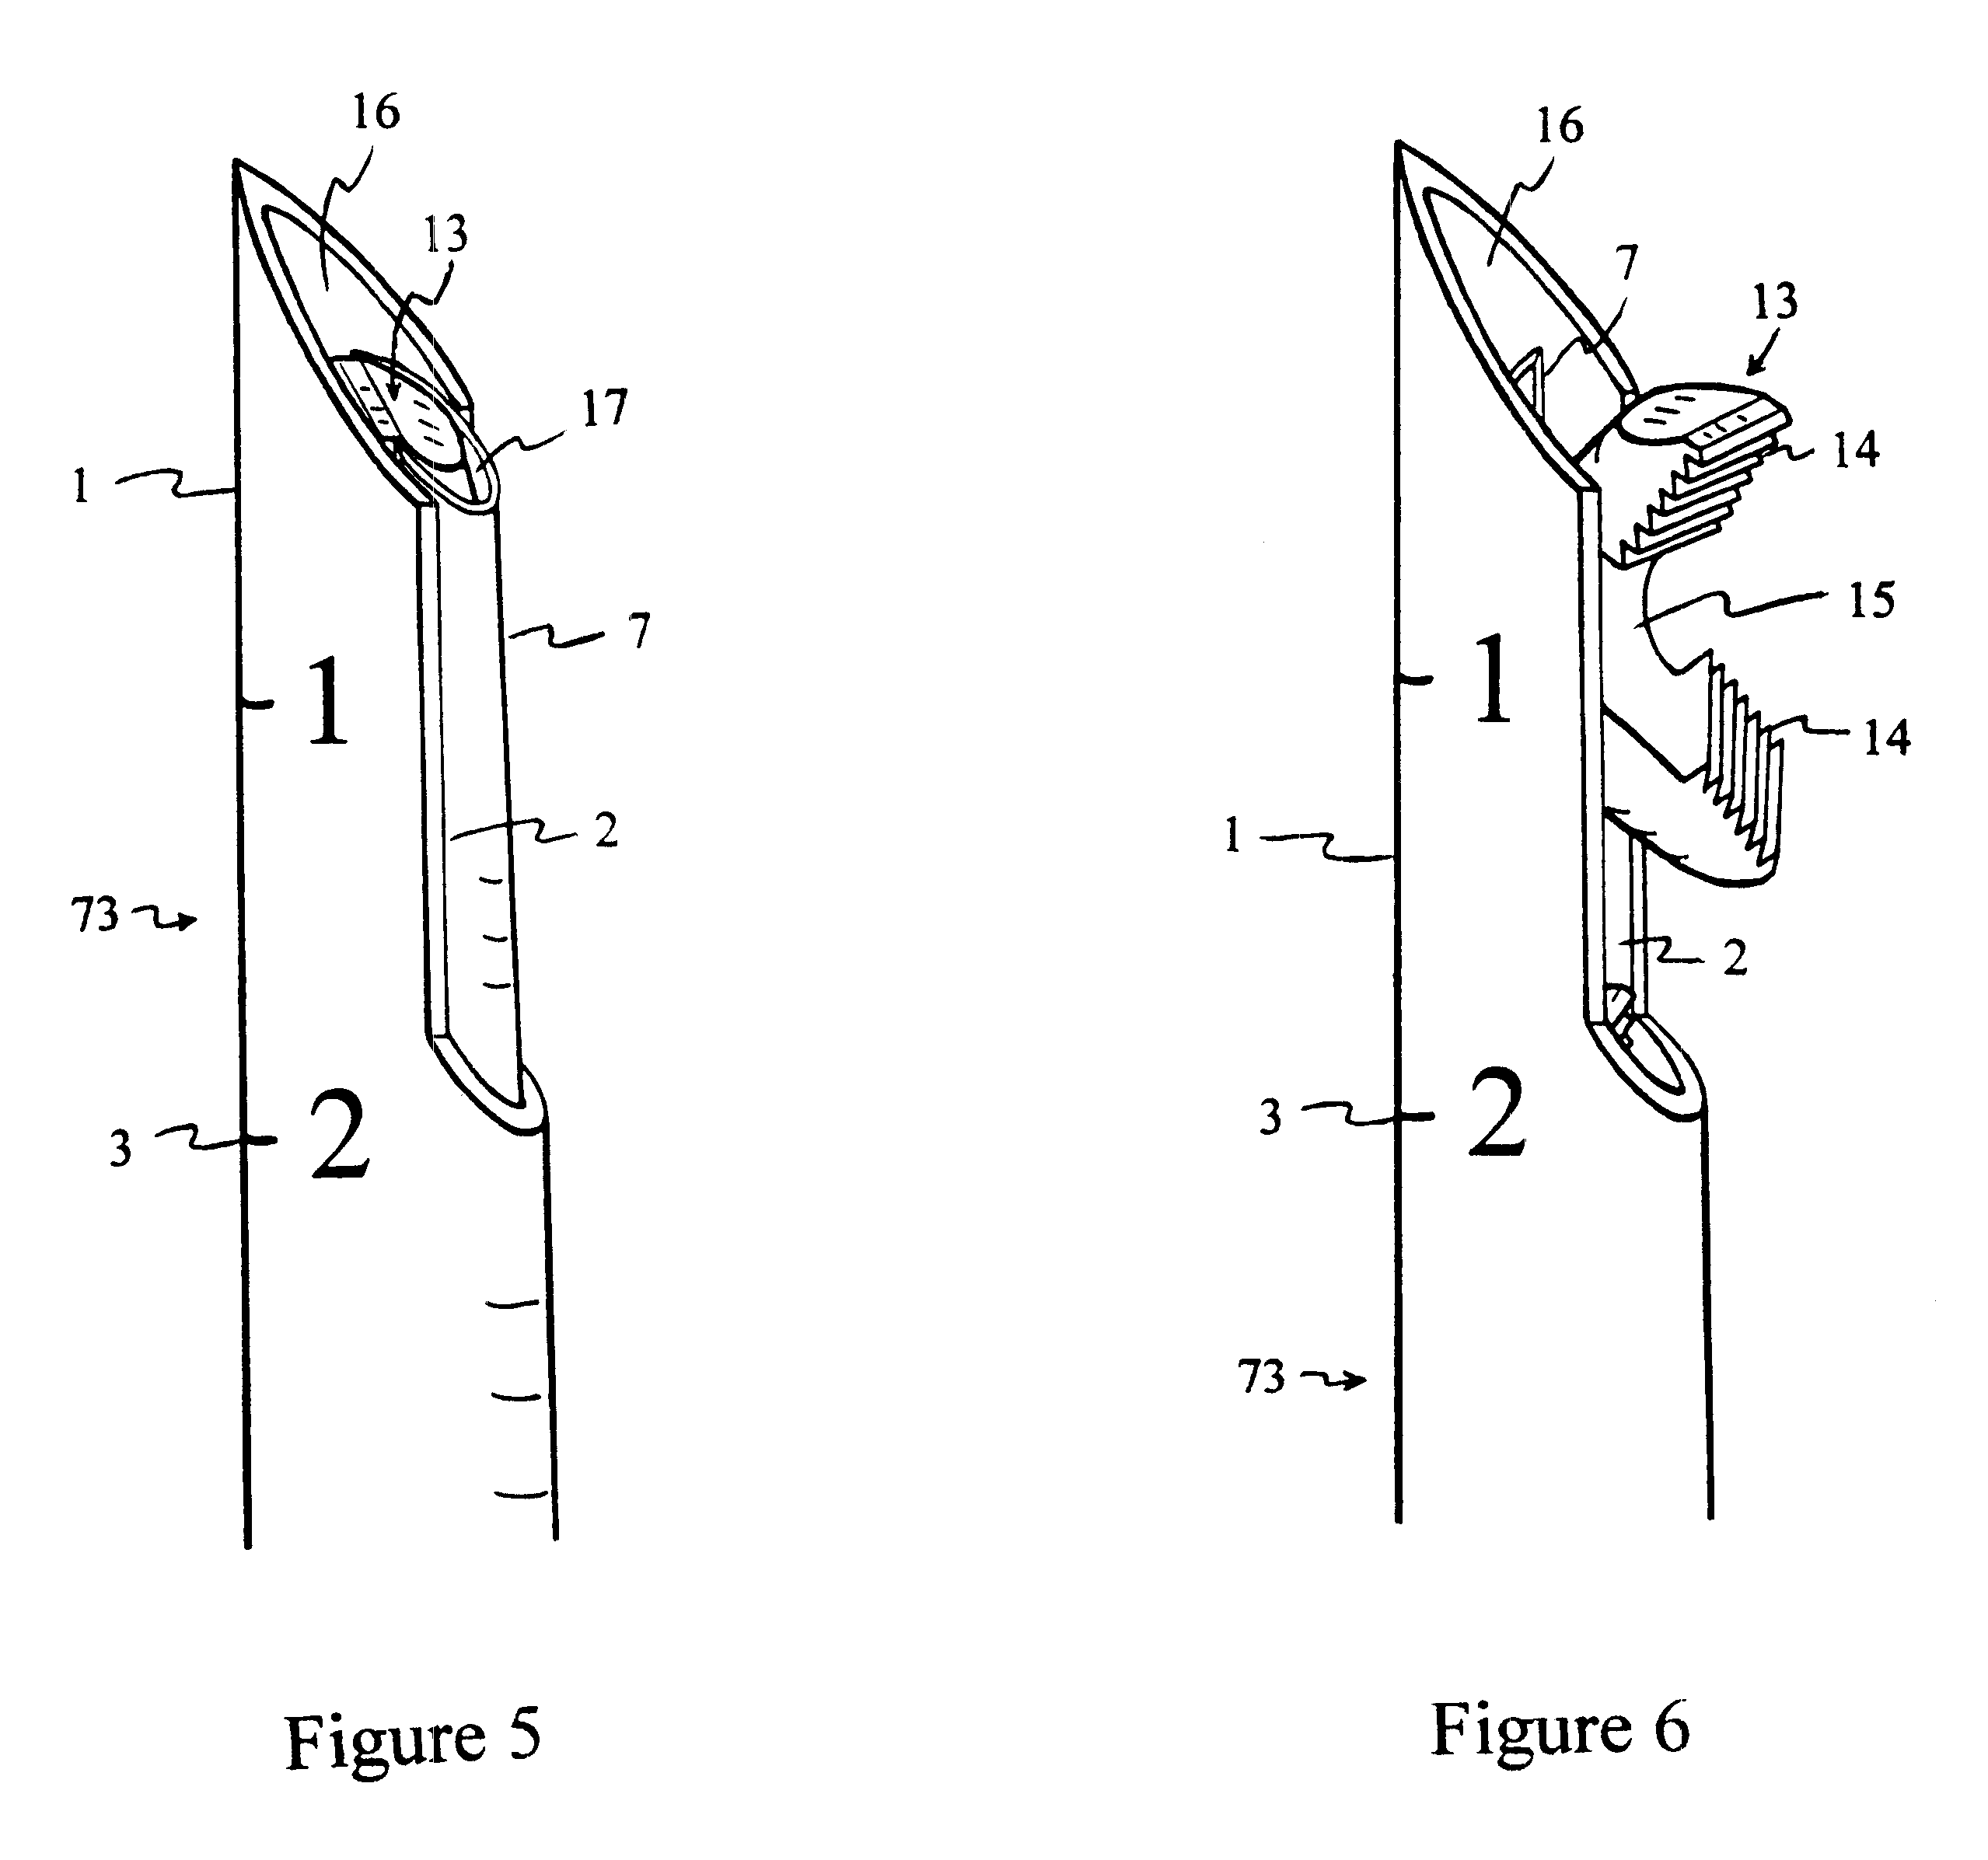 Tissue fastening devices and methods for sustained holding strength